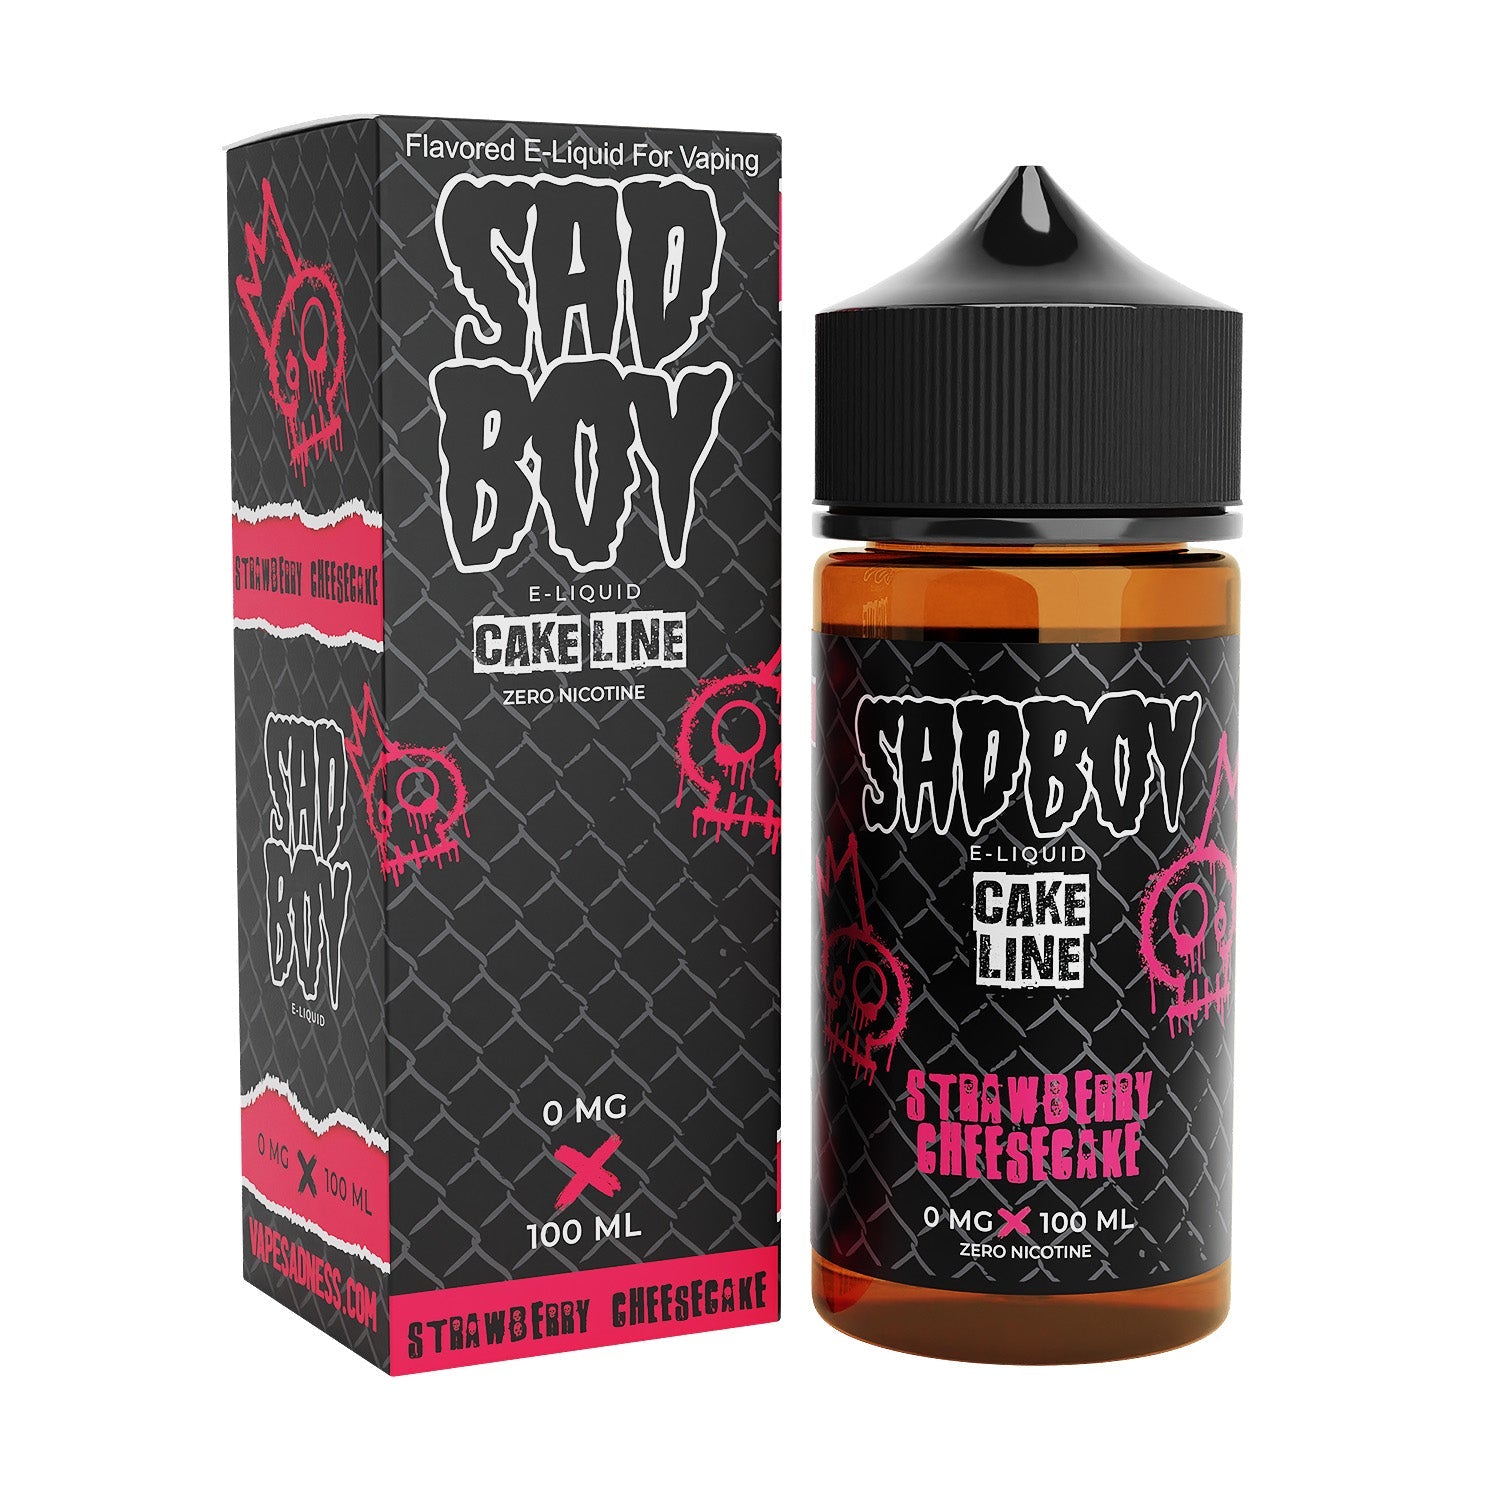 Buy Strawberry Cheesecake by Sadboy Eliquid - Wick And Wire Co Melbourne Vape Shop, Victoria Australia